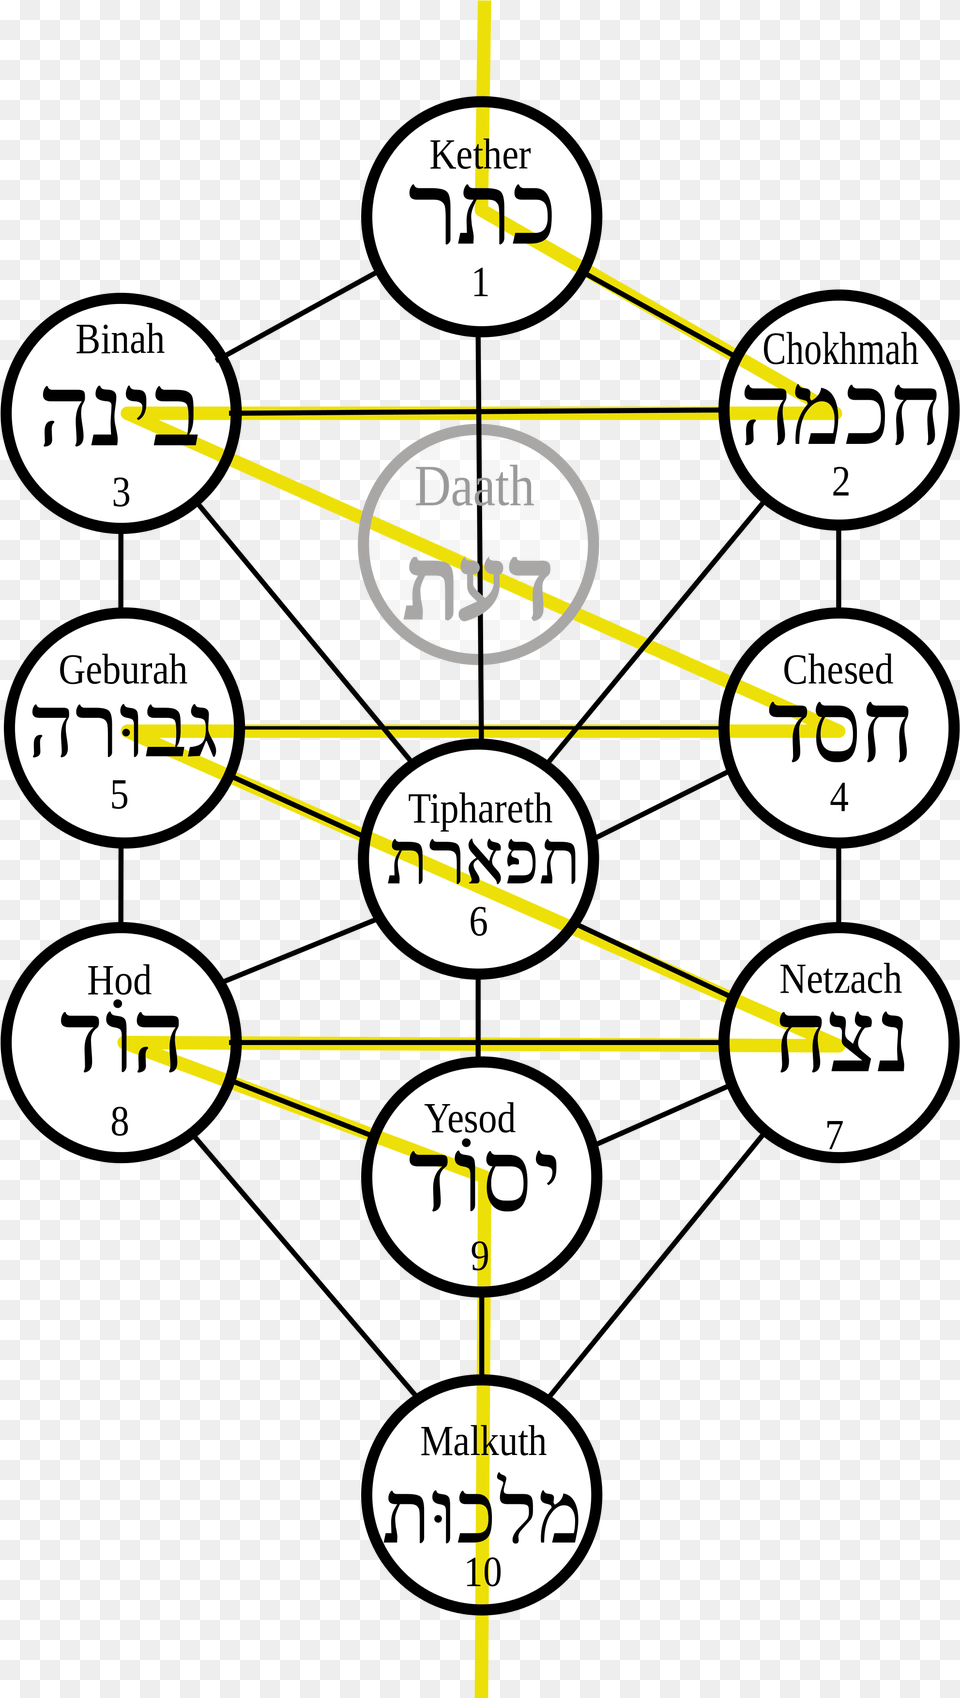 Image Result For Spelling In Hebrew Letters Of Malkuth Kabbalah Tree Of Life Hebrew, Diagram Free Png